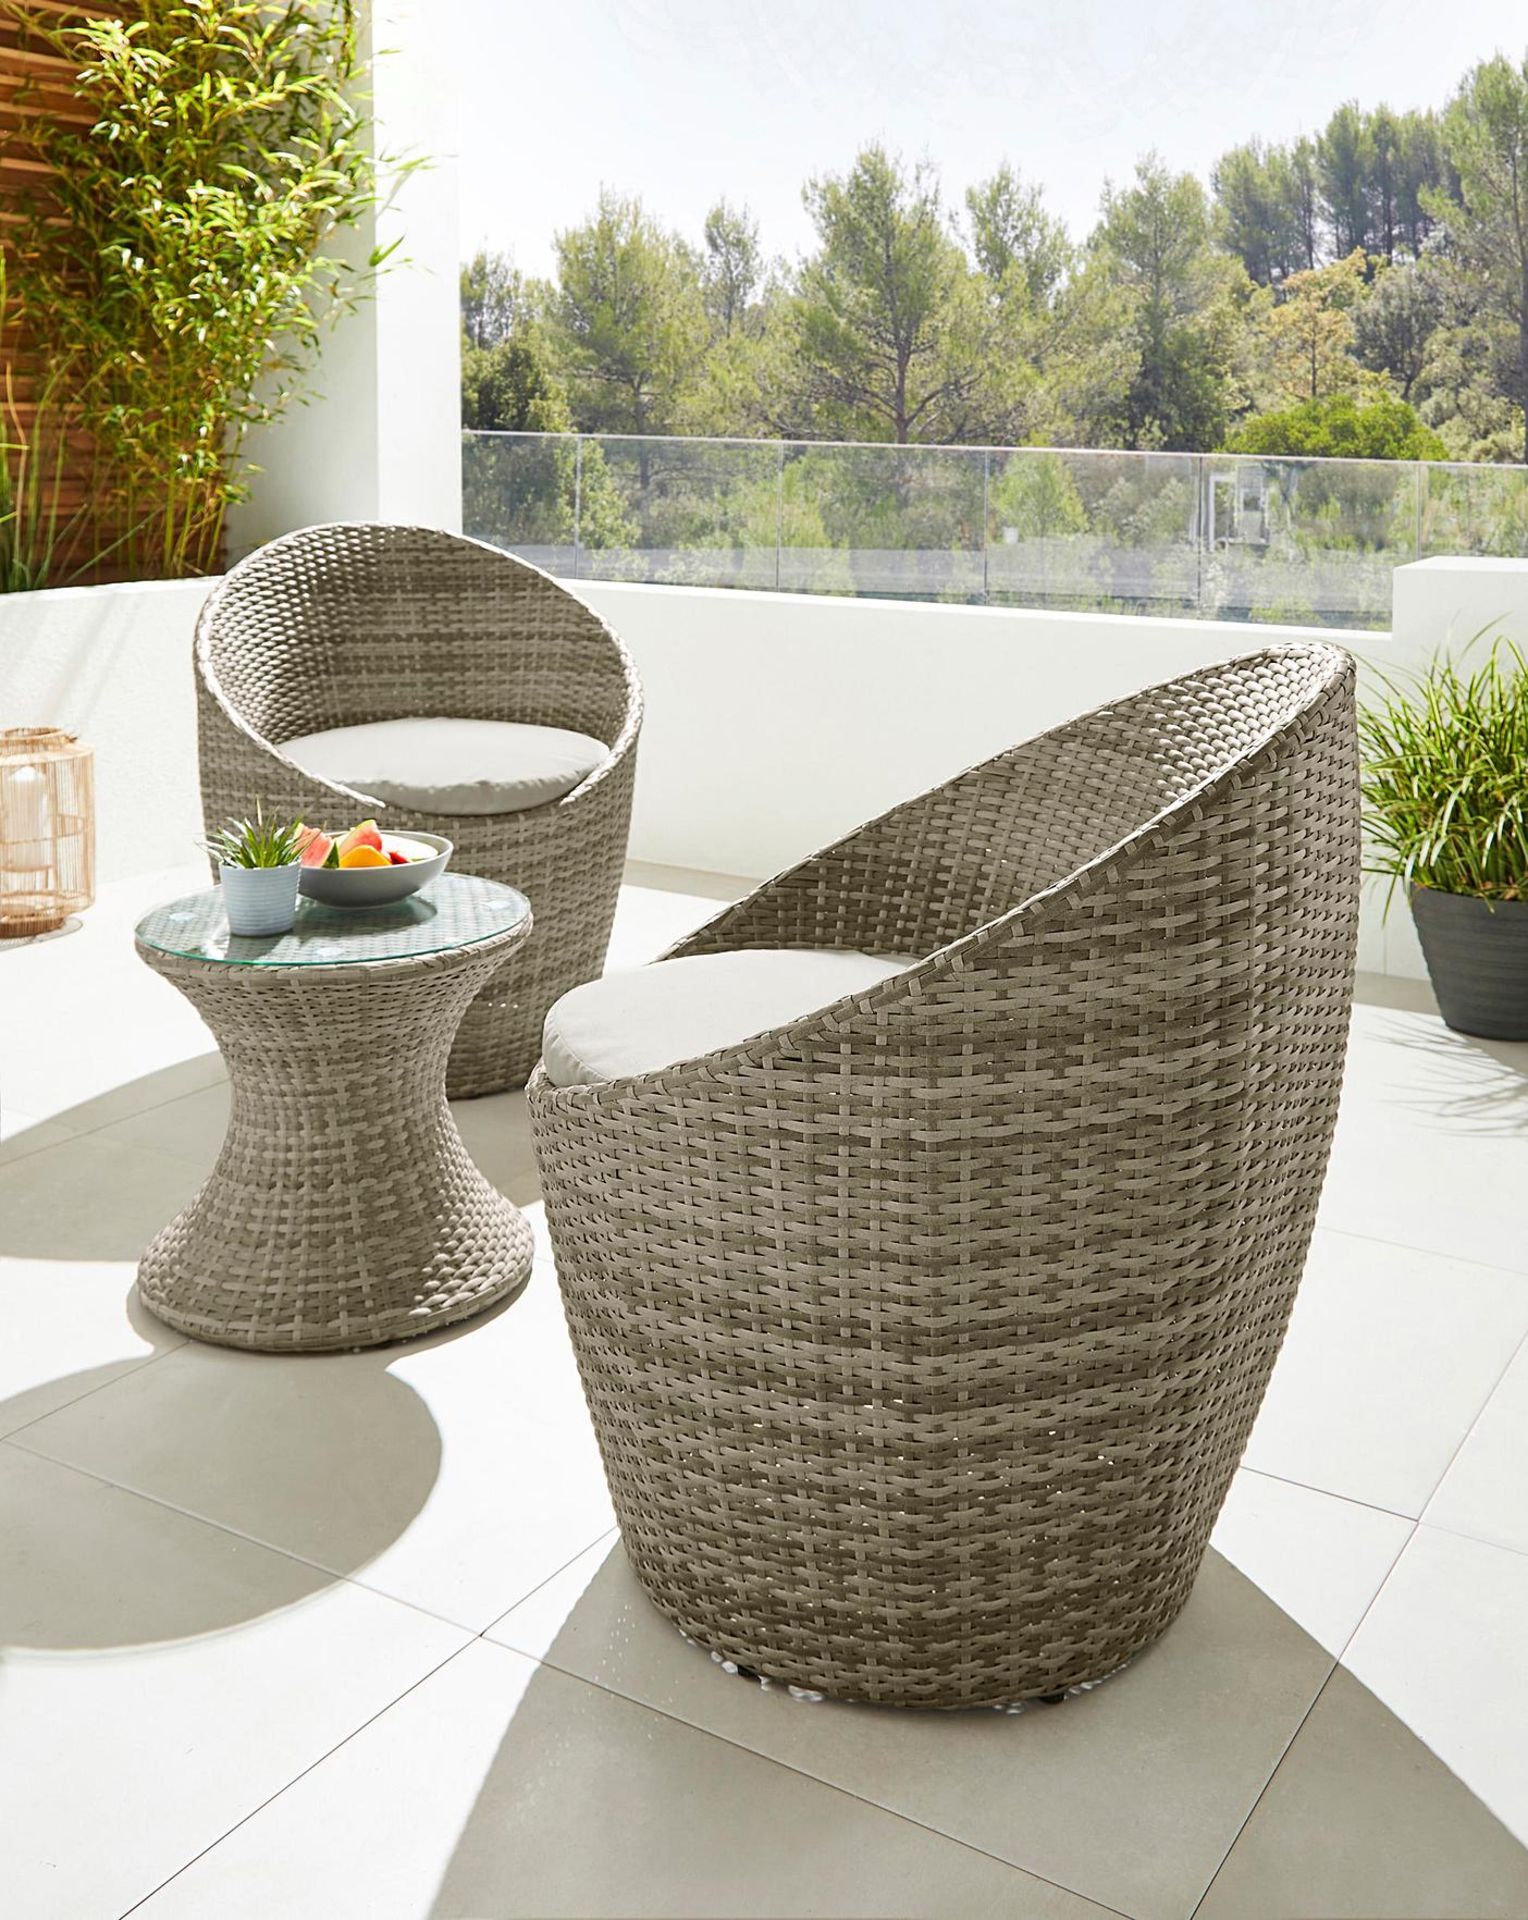 TRADE LOT 5 x NEW & BOXED Luxury 3 Piece Pula Bistro Lounge Set. RRP £399.99 Each. This modern